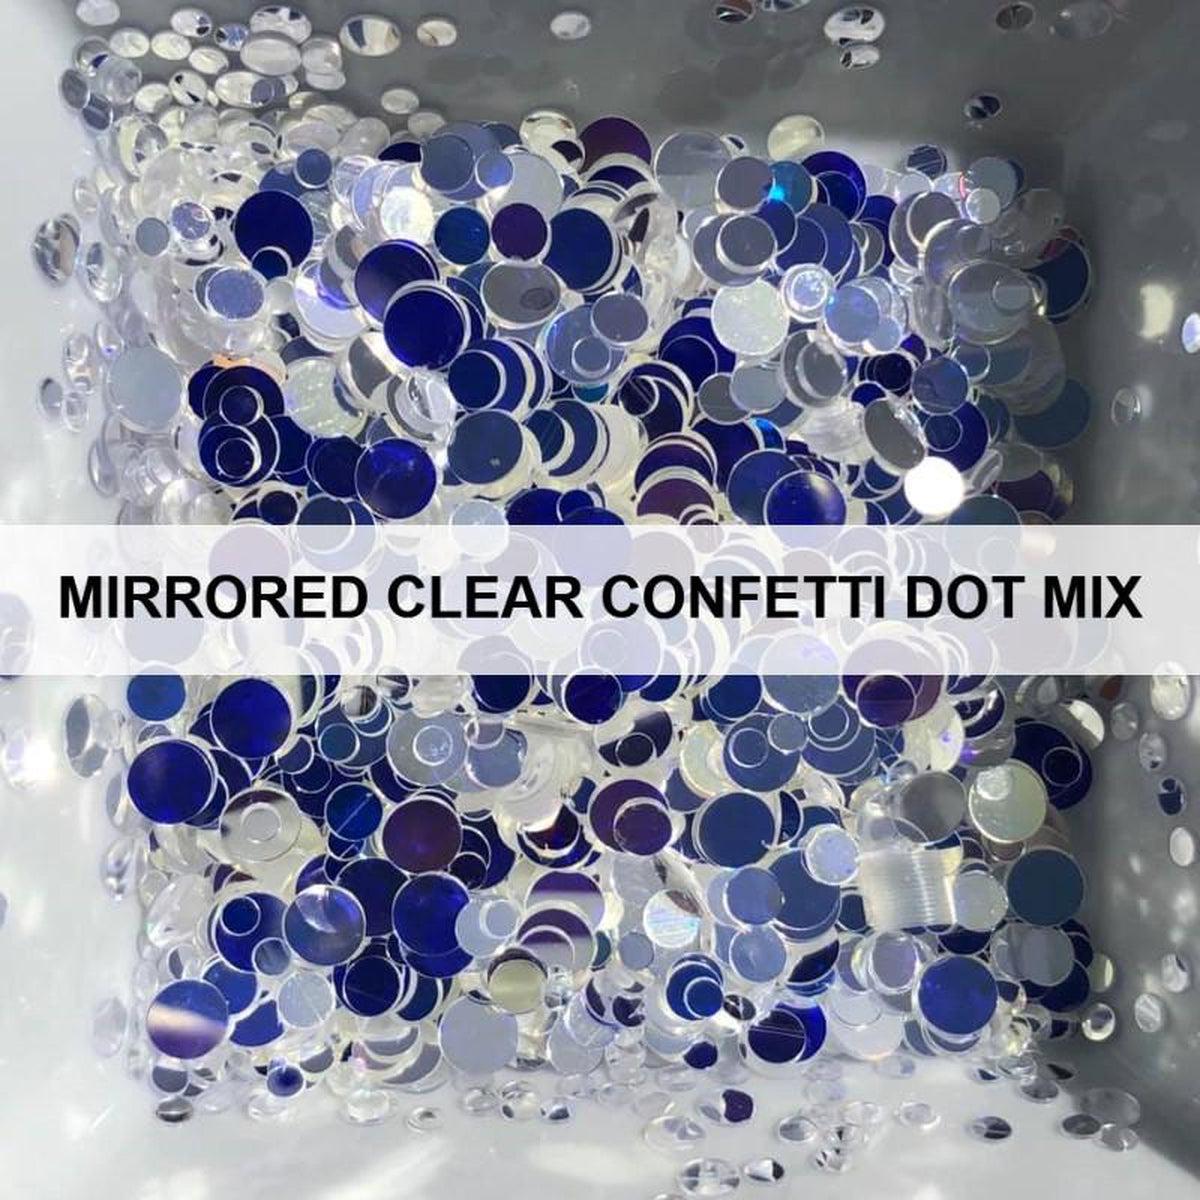 Mirrored Clear Confetti Dot Mix - Sequins - Kat Scrappiness